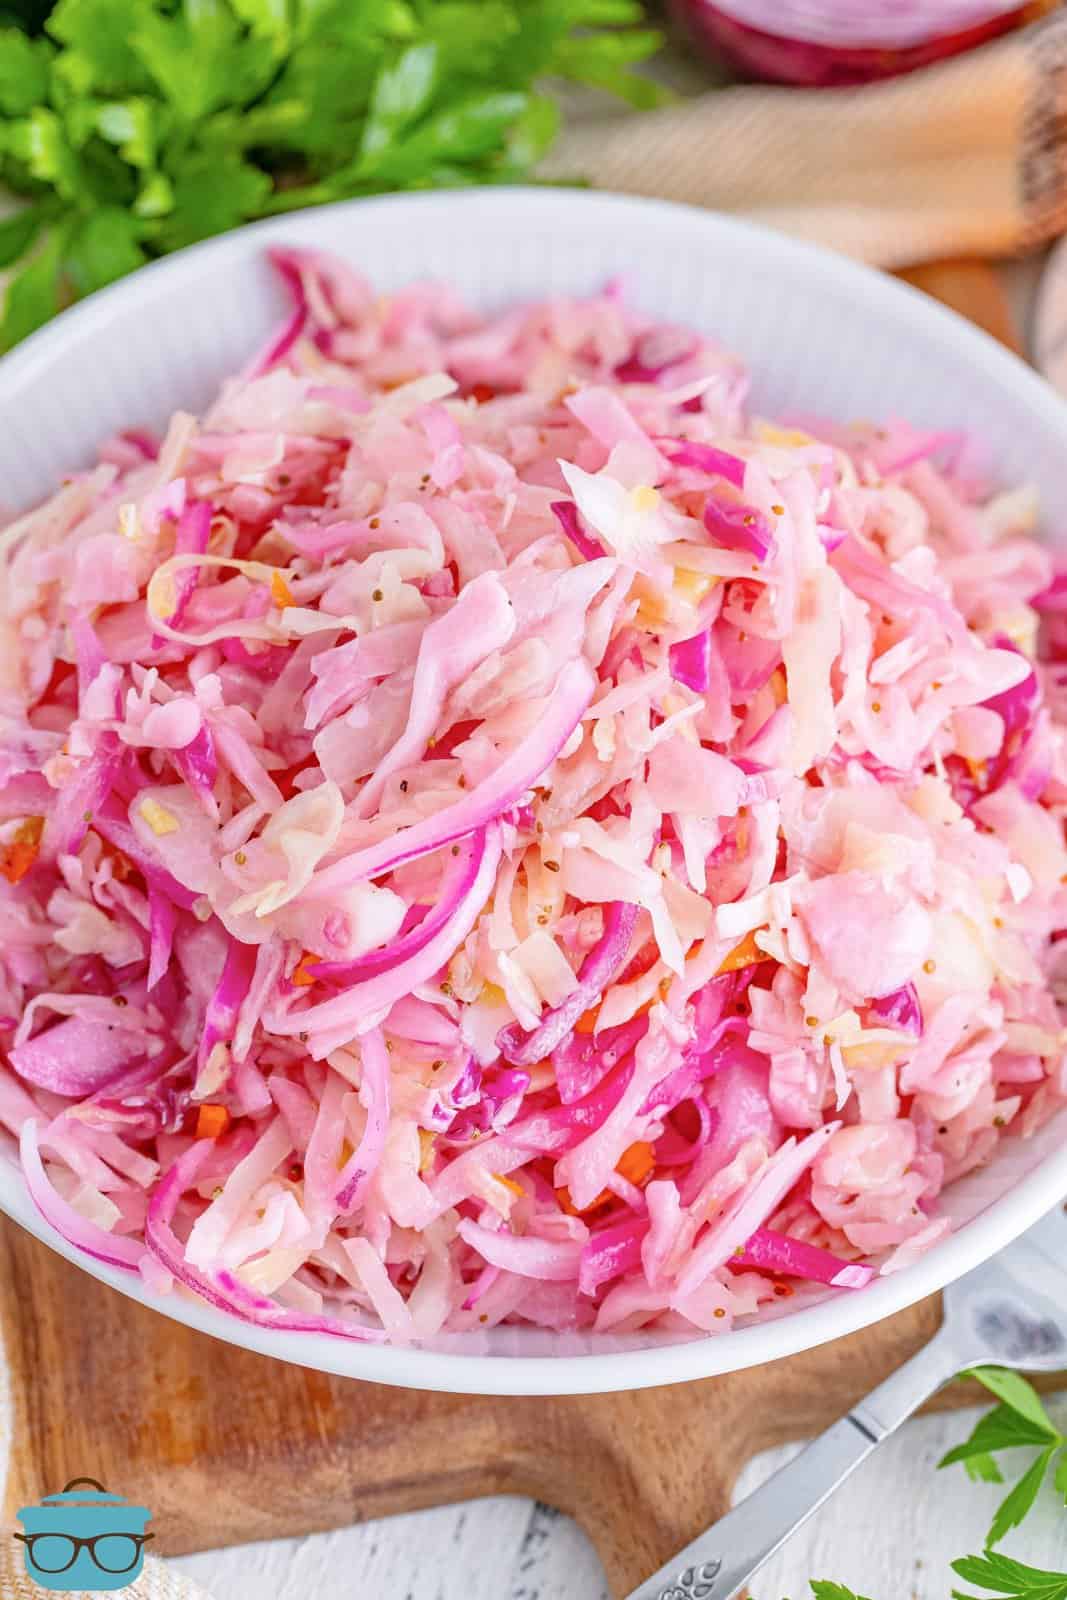 Looking down on a marinated cole slaw in a white glass bowl.